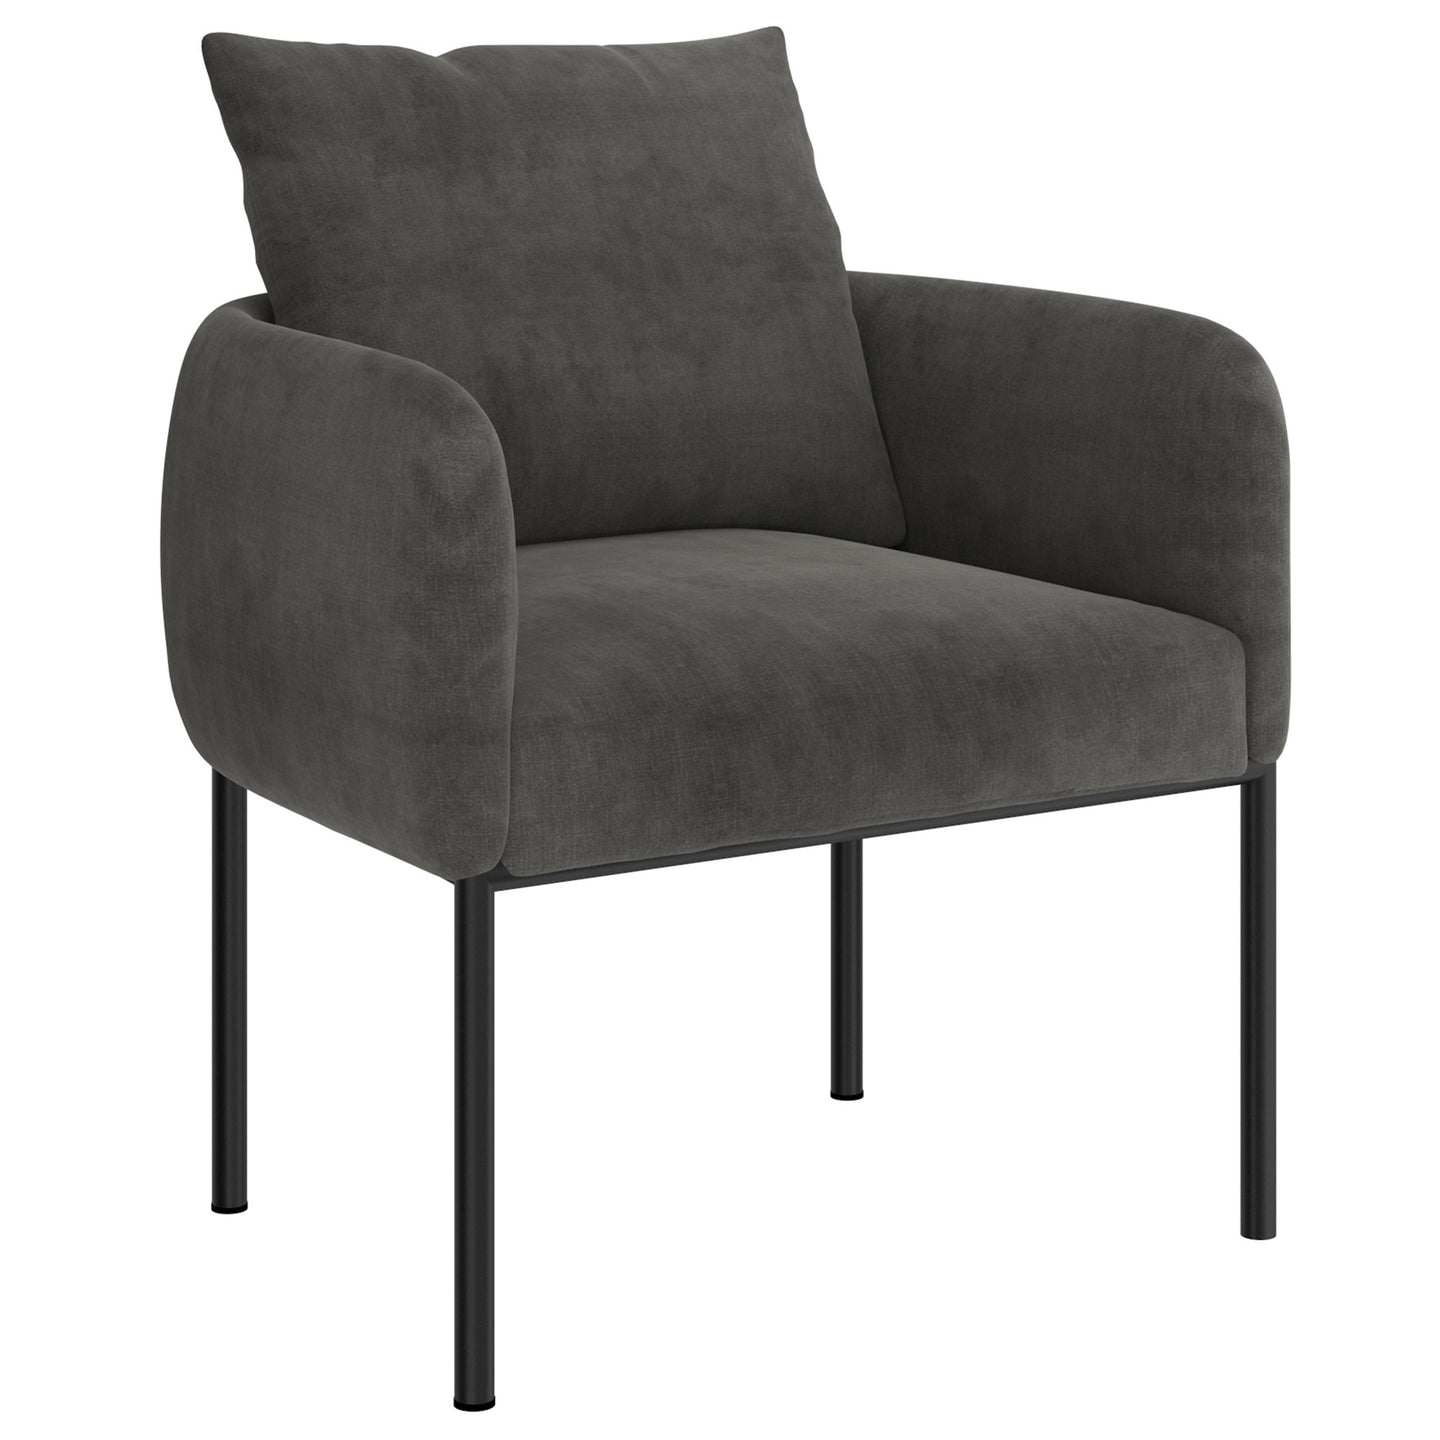 Petrie Accent Chair in Charcoal with Black Leg